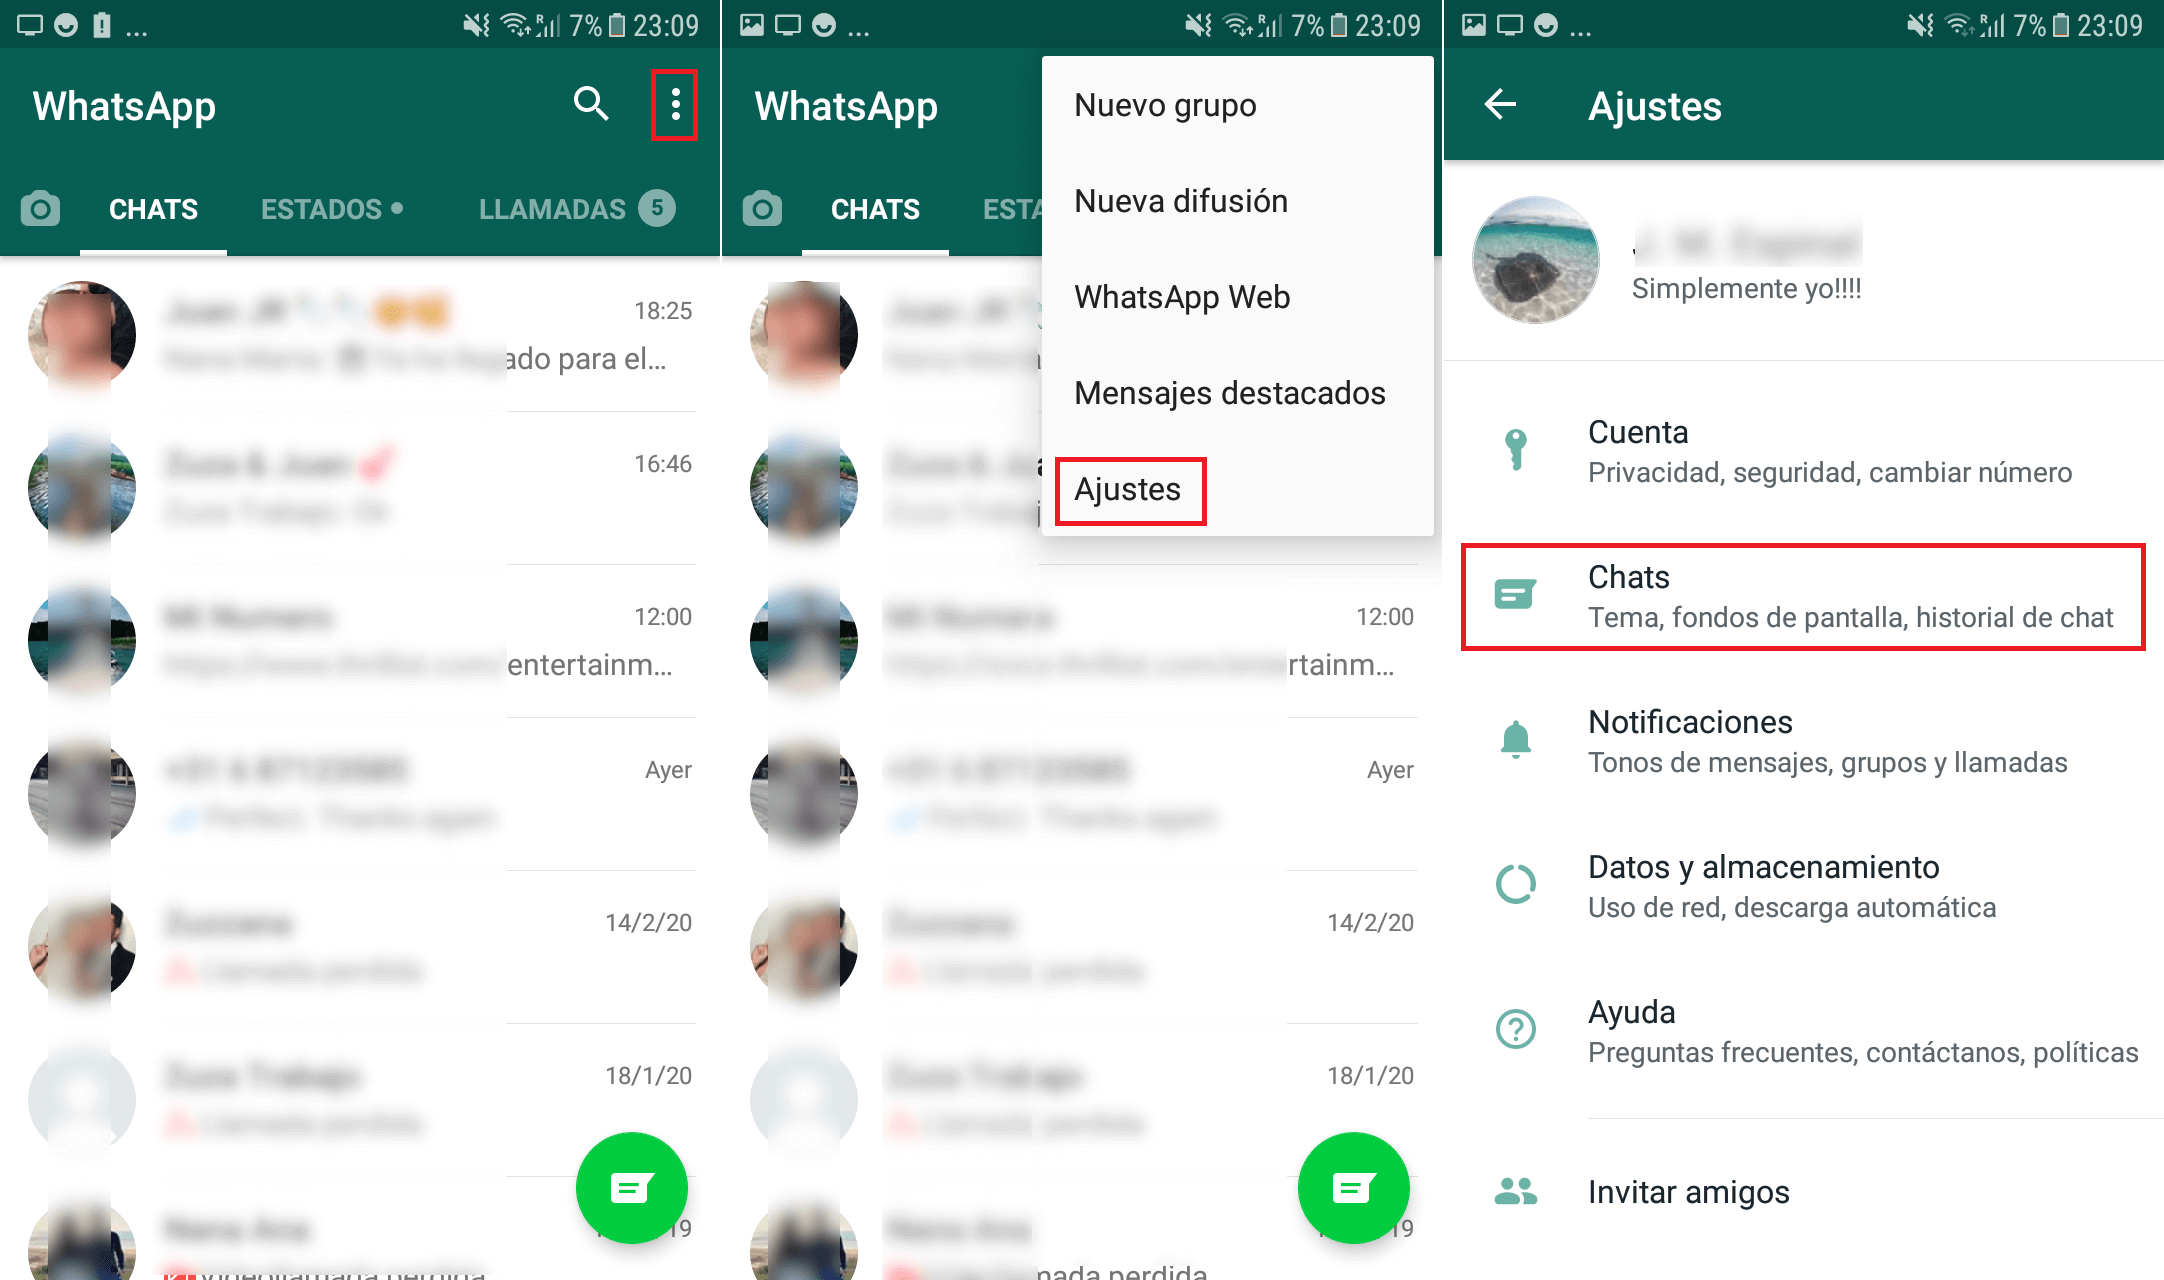 Whatsapp Dark Mode for android and iPhone